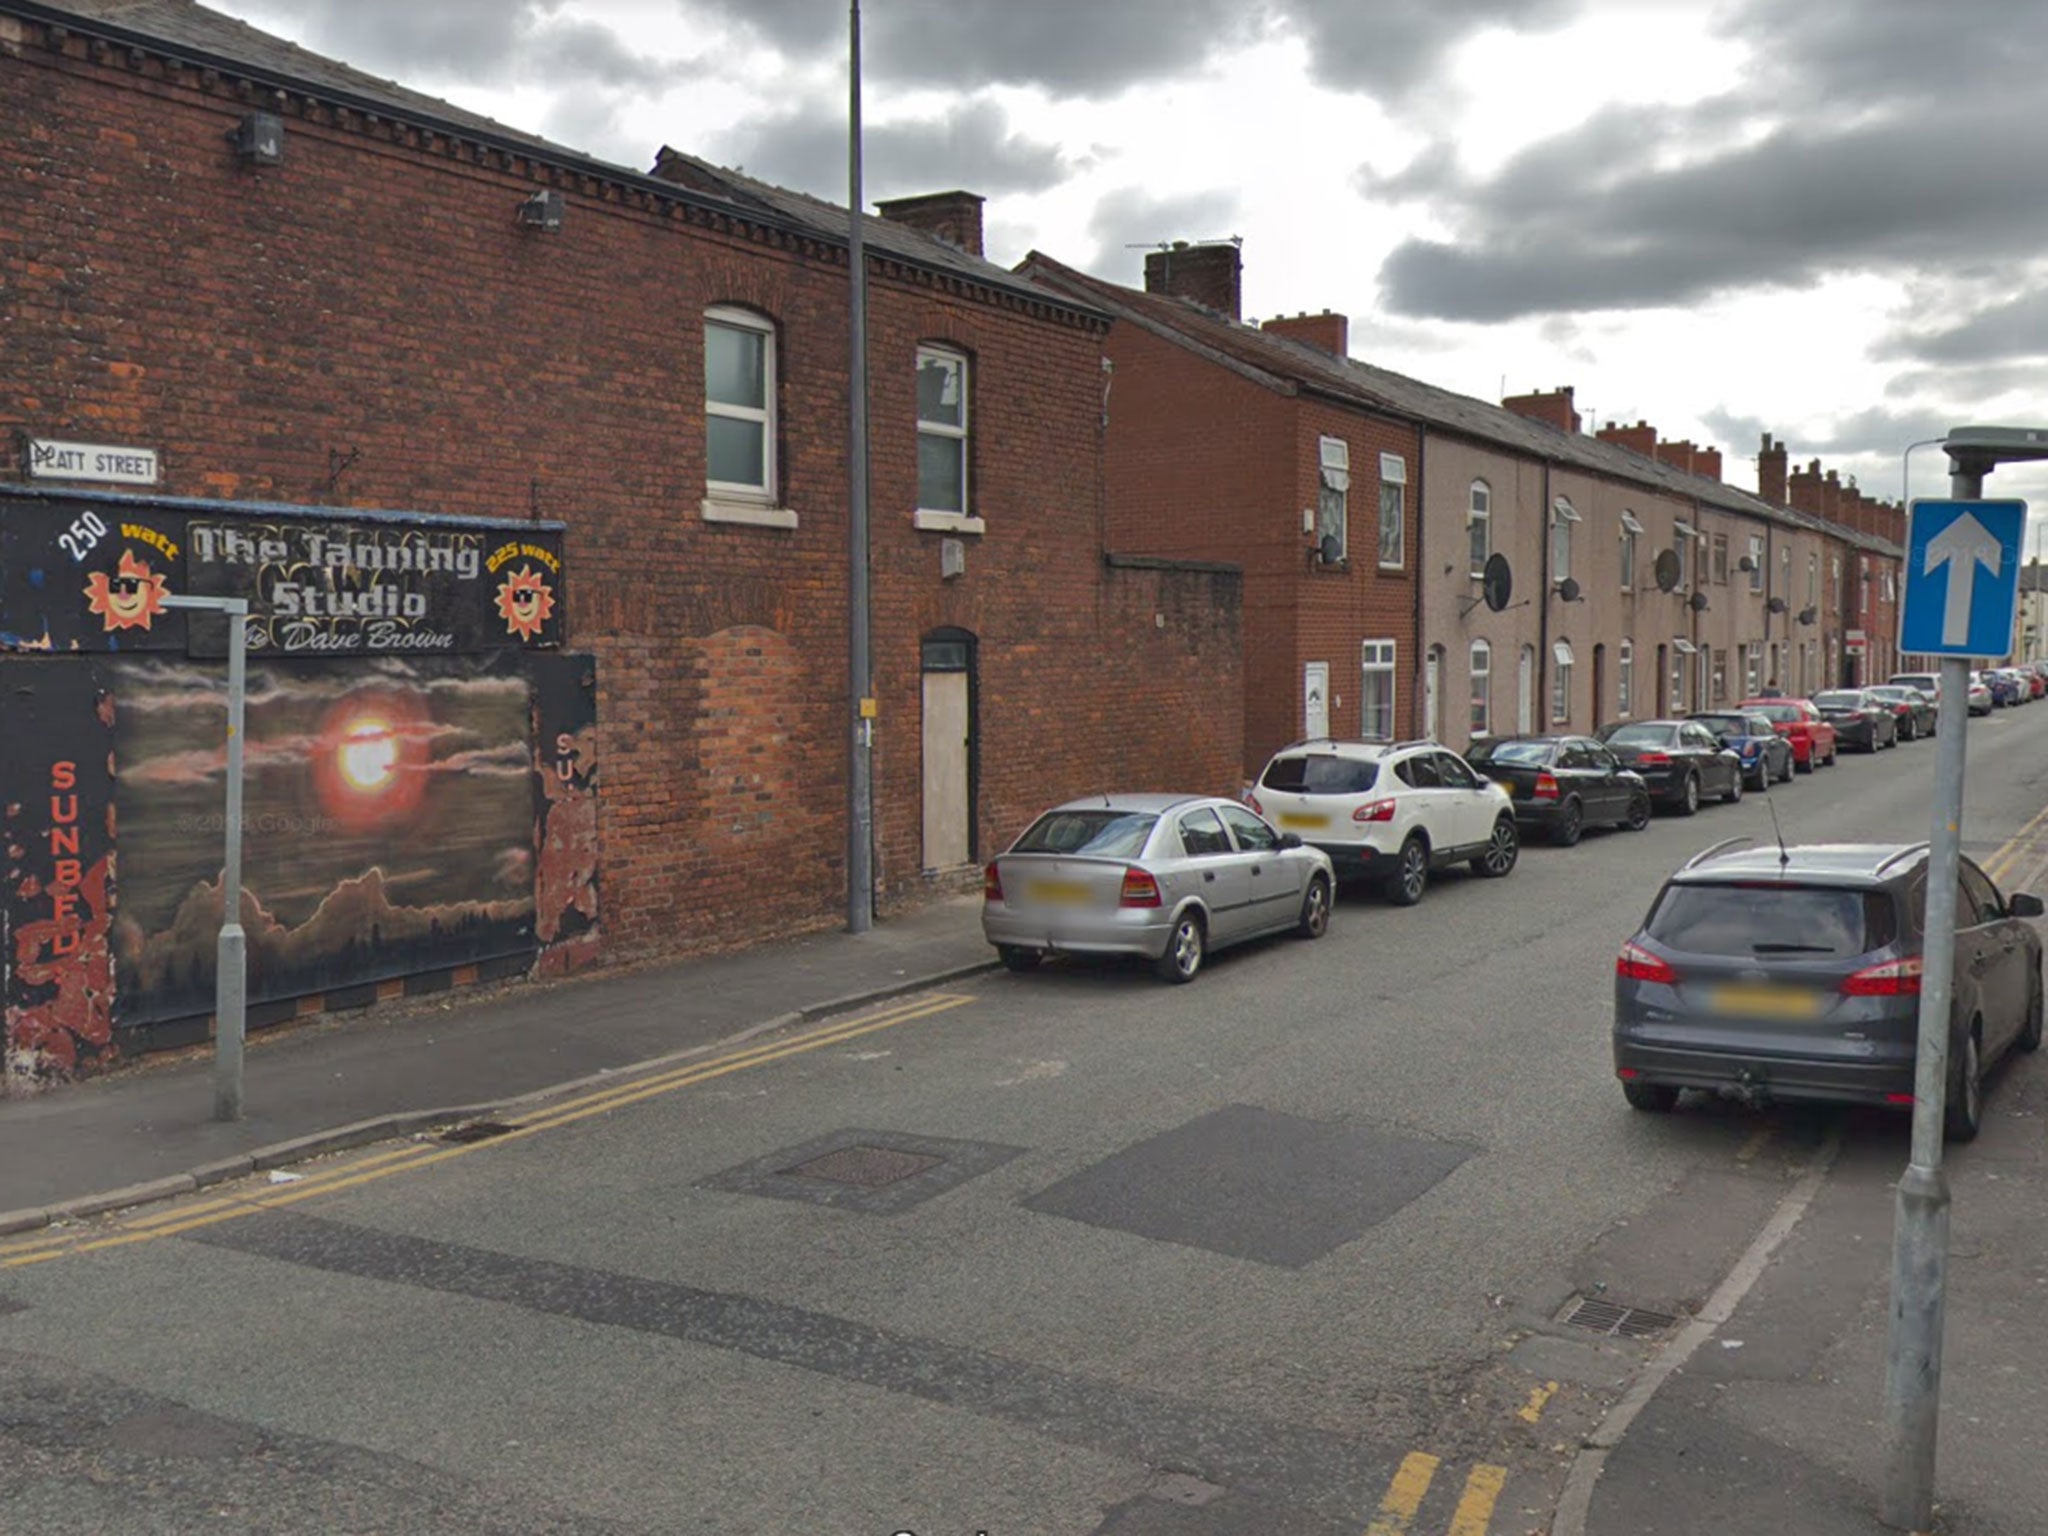 The stabbing happened in a house on Platt Street in Leigh, Wigan